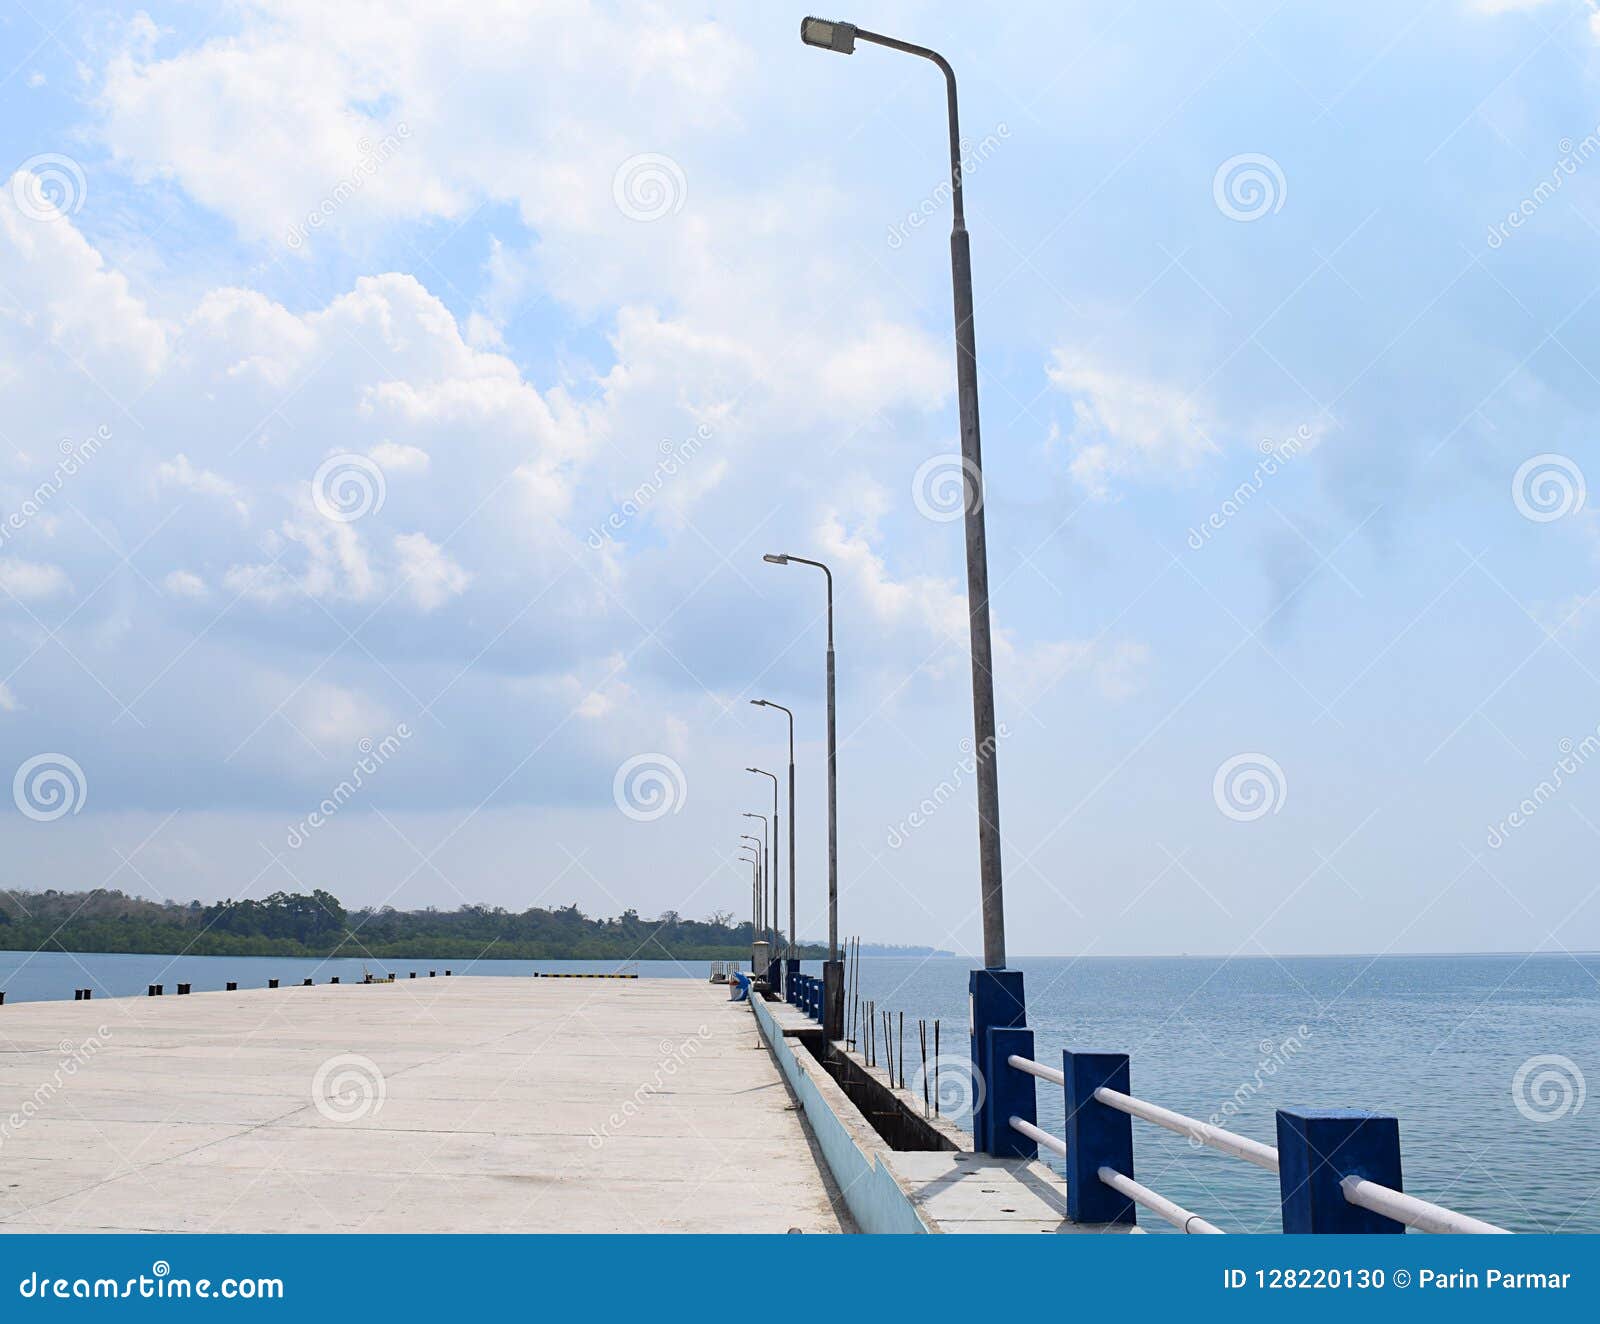 uncrowded ferry jetty with poles of light in open sea and cloudy sky